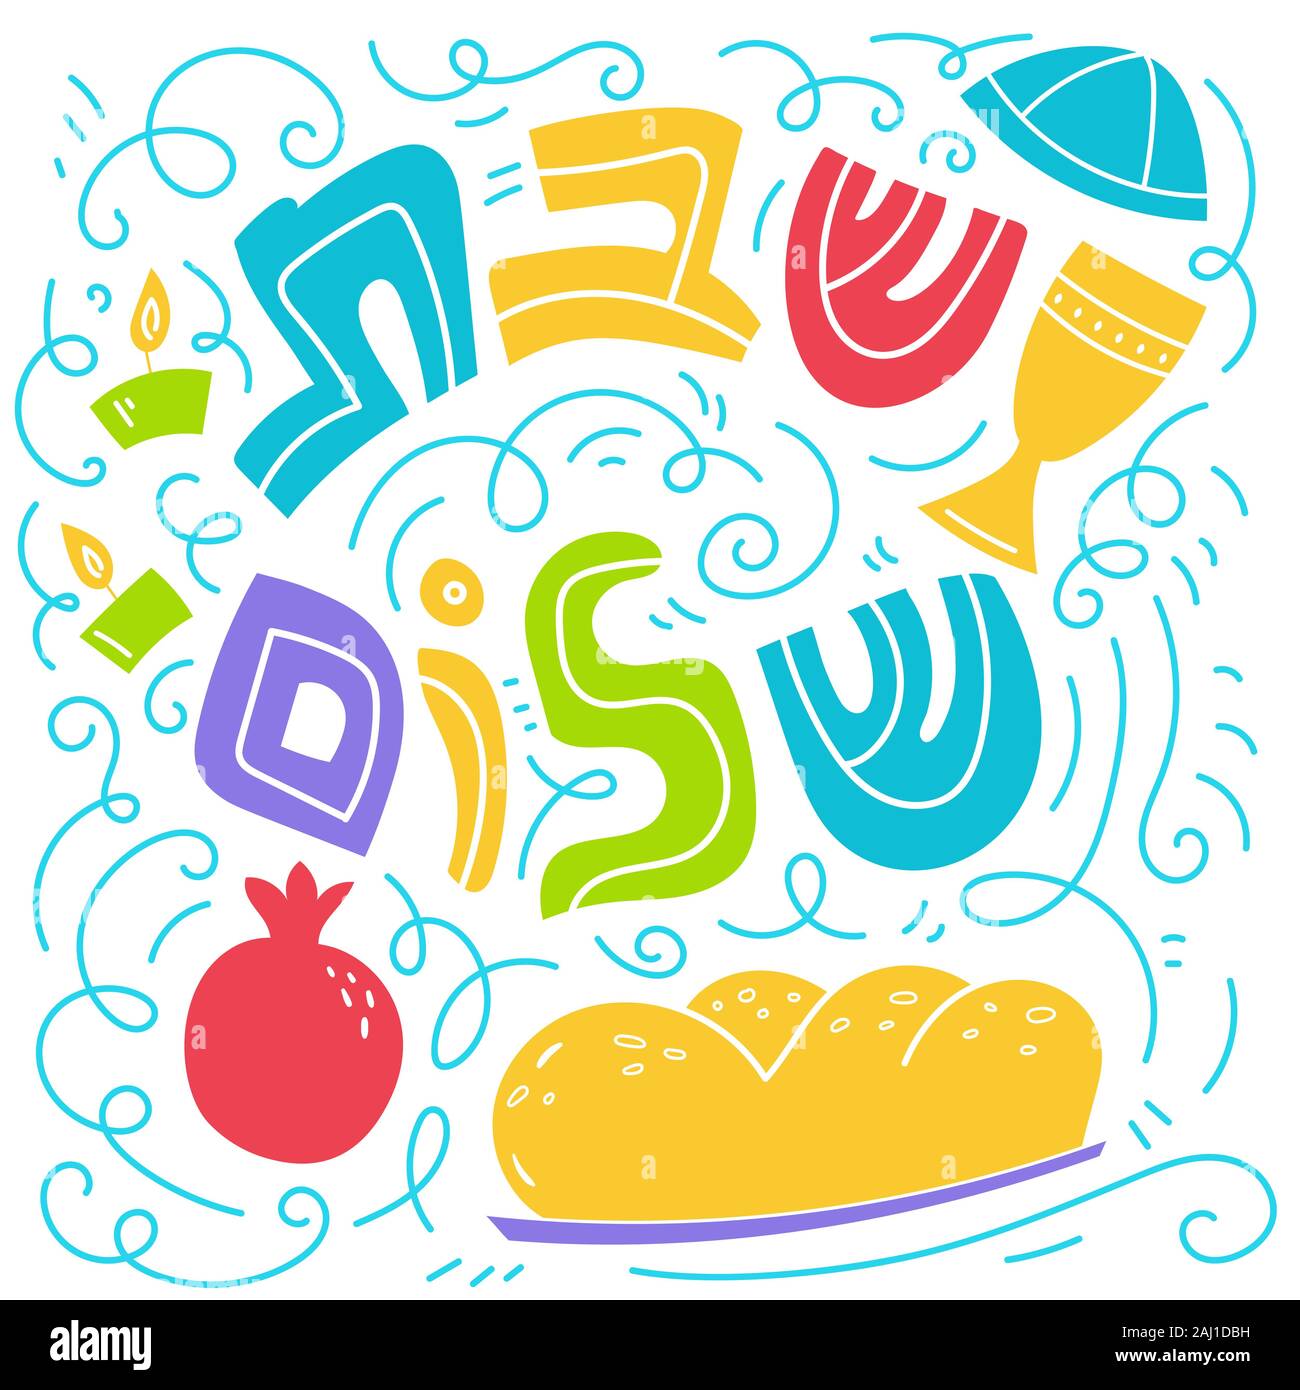 Shabbat shalom greeting card. Hand drawn lettering, candles, kiddush cup and challah. Hebrew text 'Shabbat Shalom'. Vector illustration. Isolated on white. Stock Vector